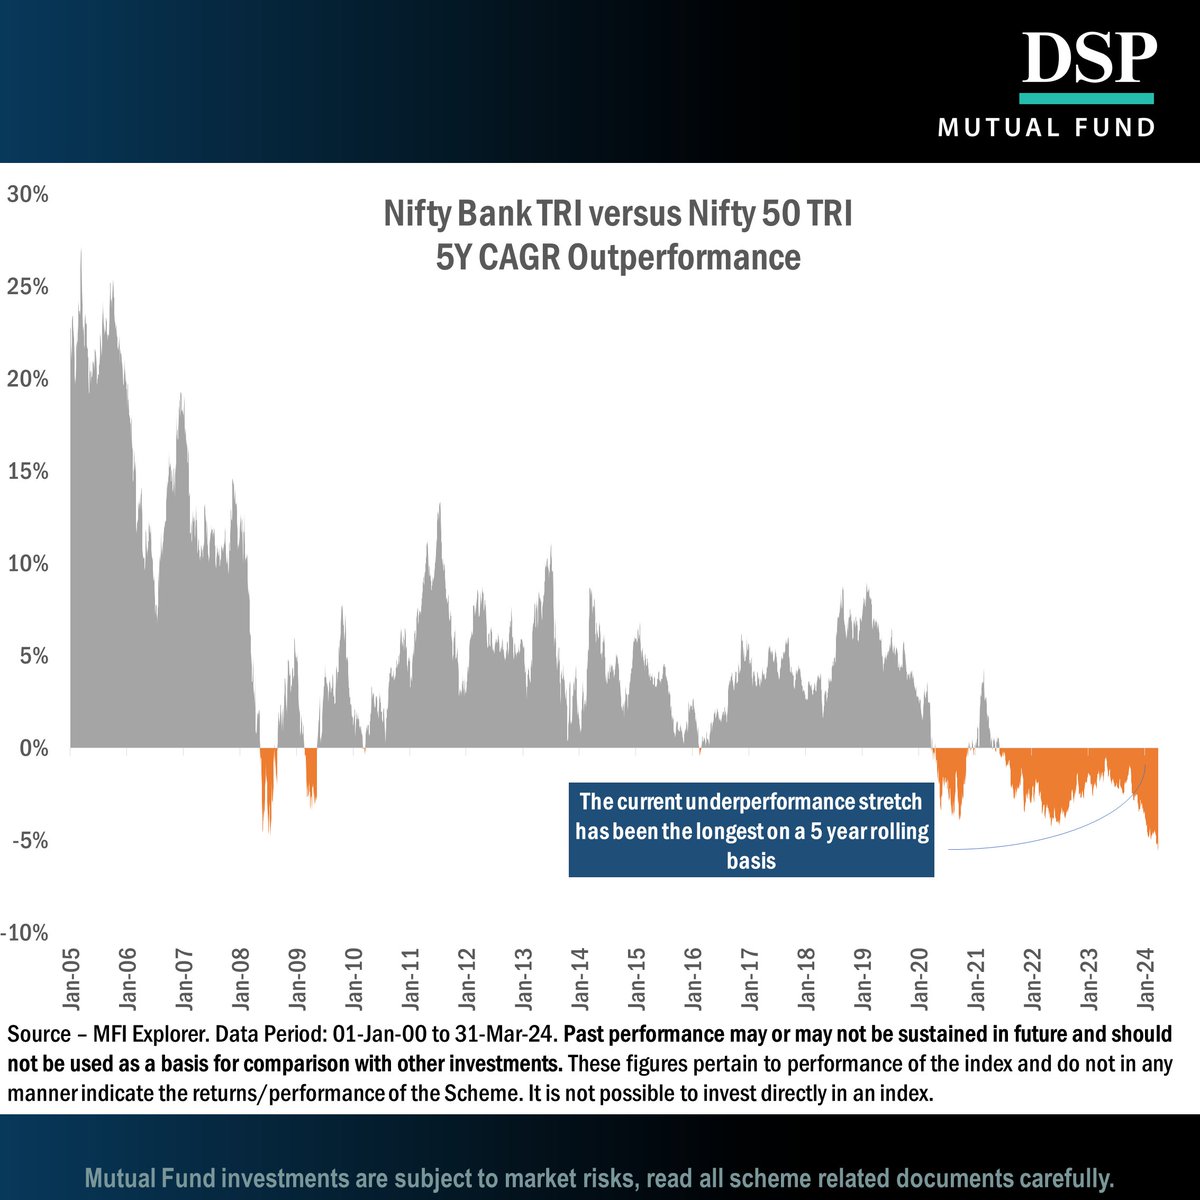 #DSPInsights Banking: A sensible choice today? At 1055 days, the current underperformance in the banking sector vs Nifty 50 has lasted the longest, on a 5-year rolling basis. Historical data suggests such stretches may precede a rally. Add to this- average 5 yr returns…